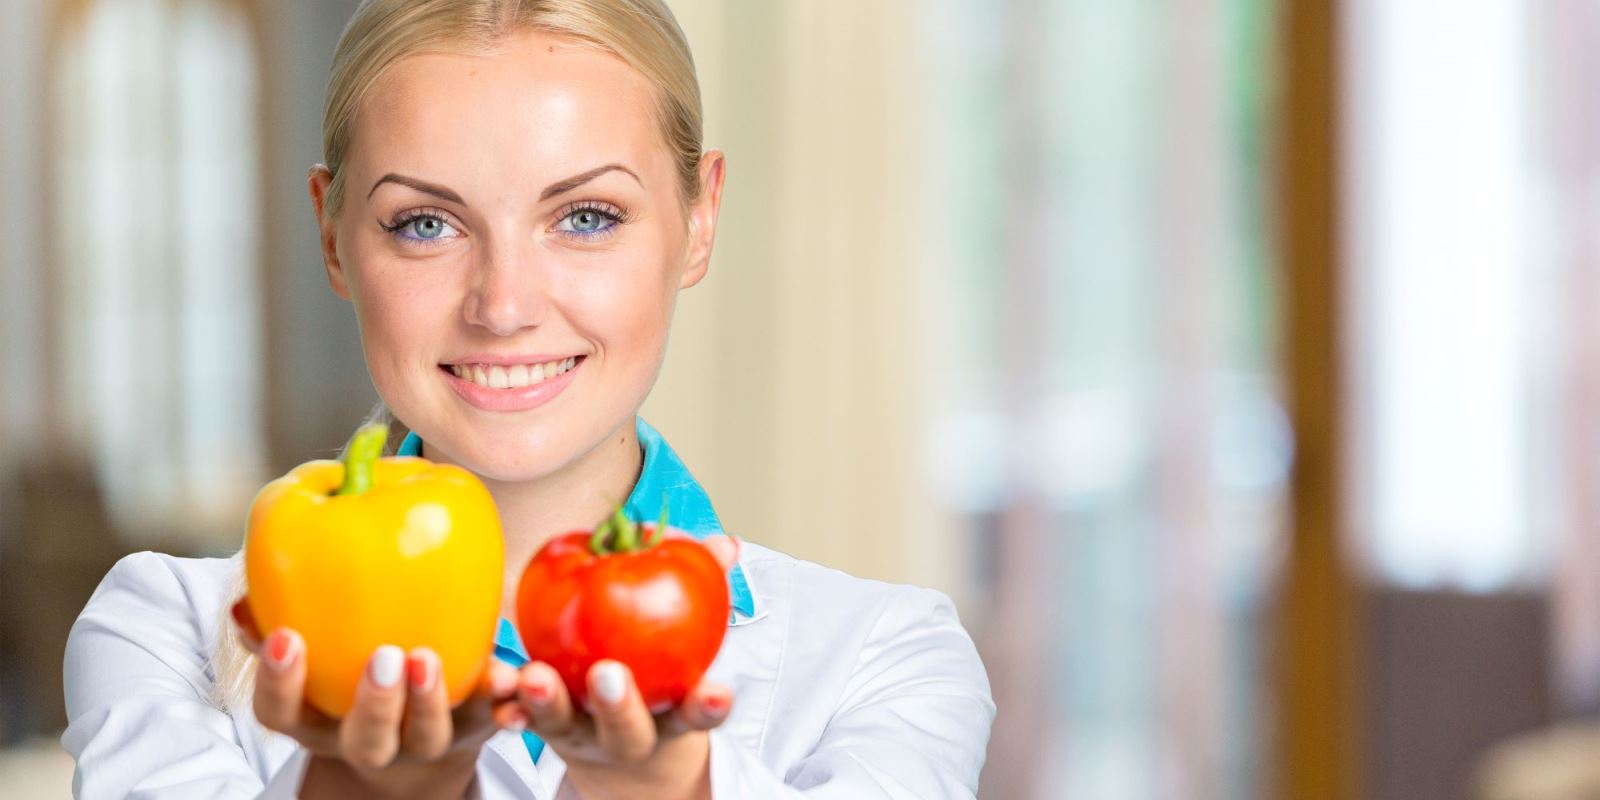 Food Safety Managing with the HACCP System